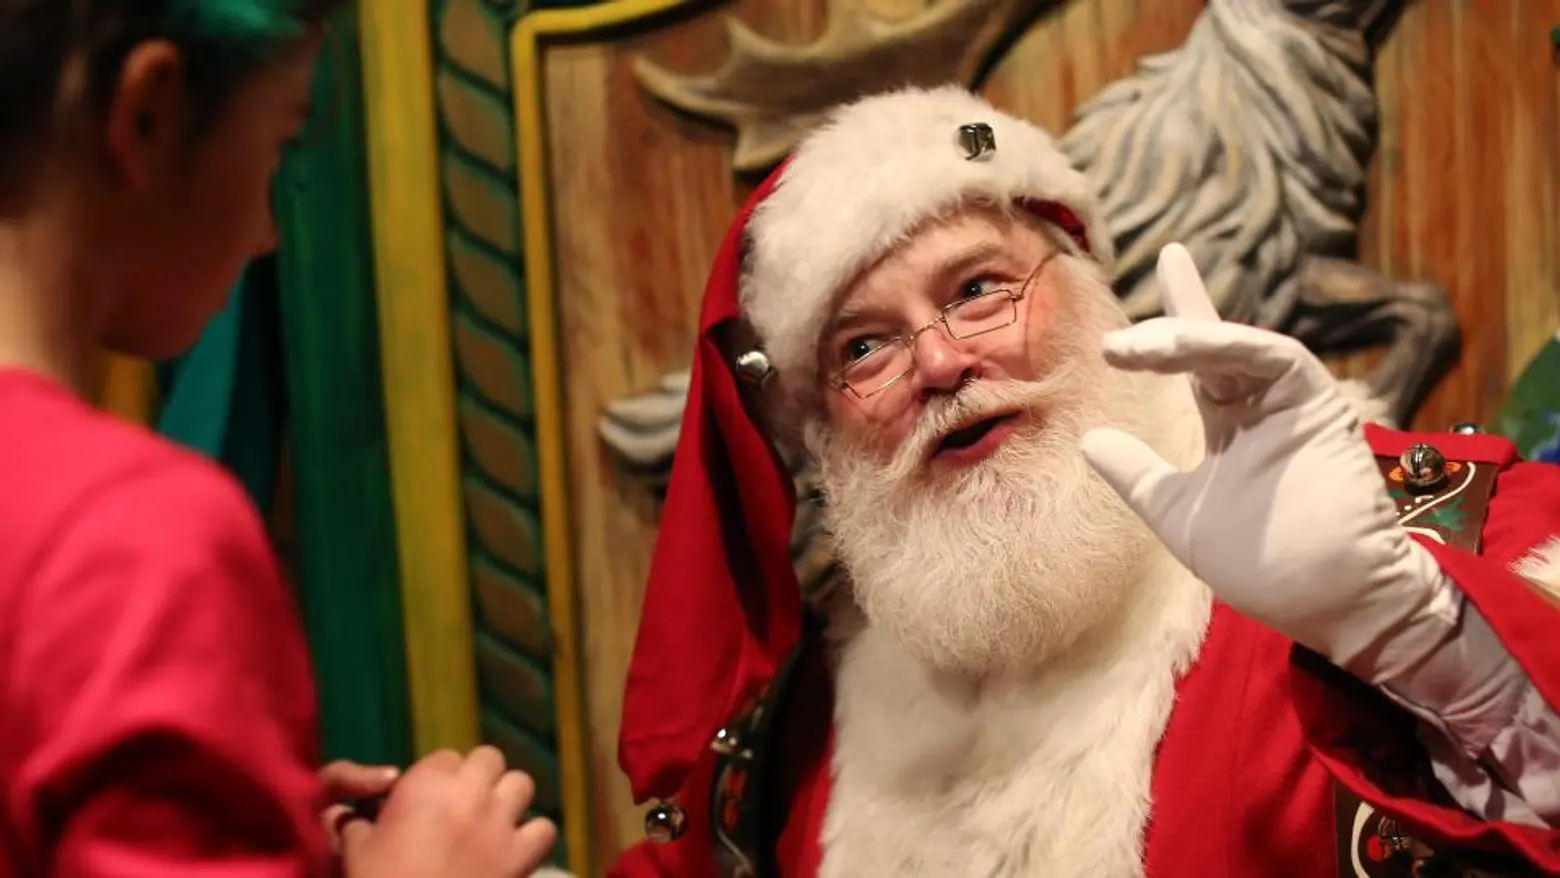 Macy’s is requiring reservations to visit Santa